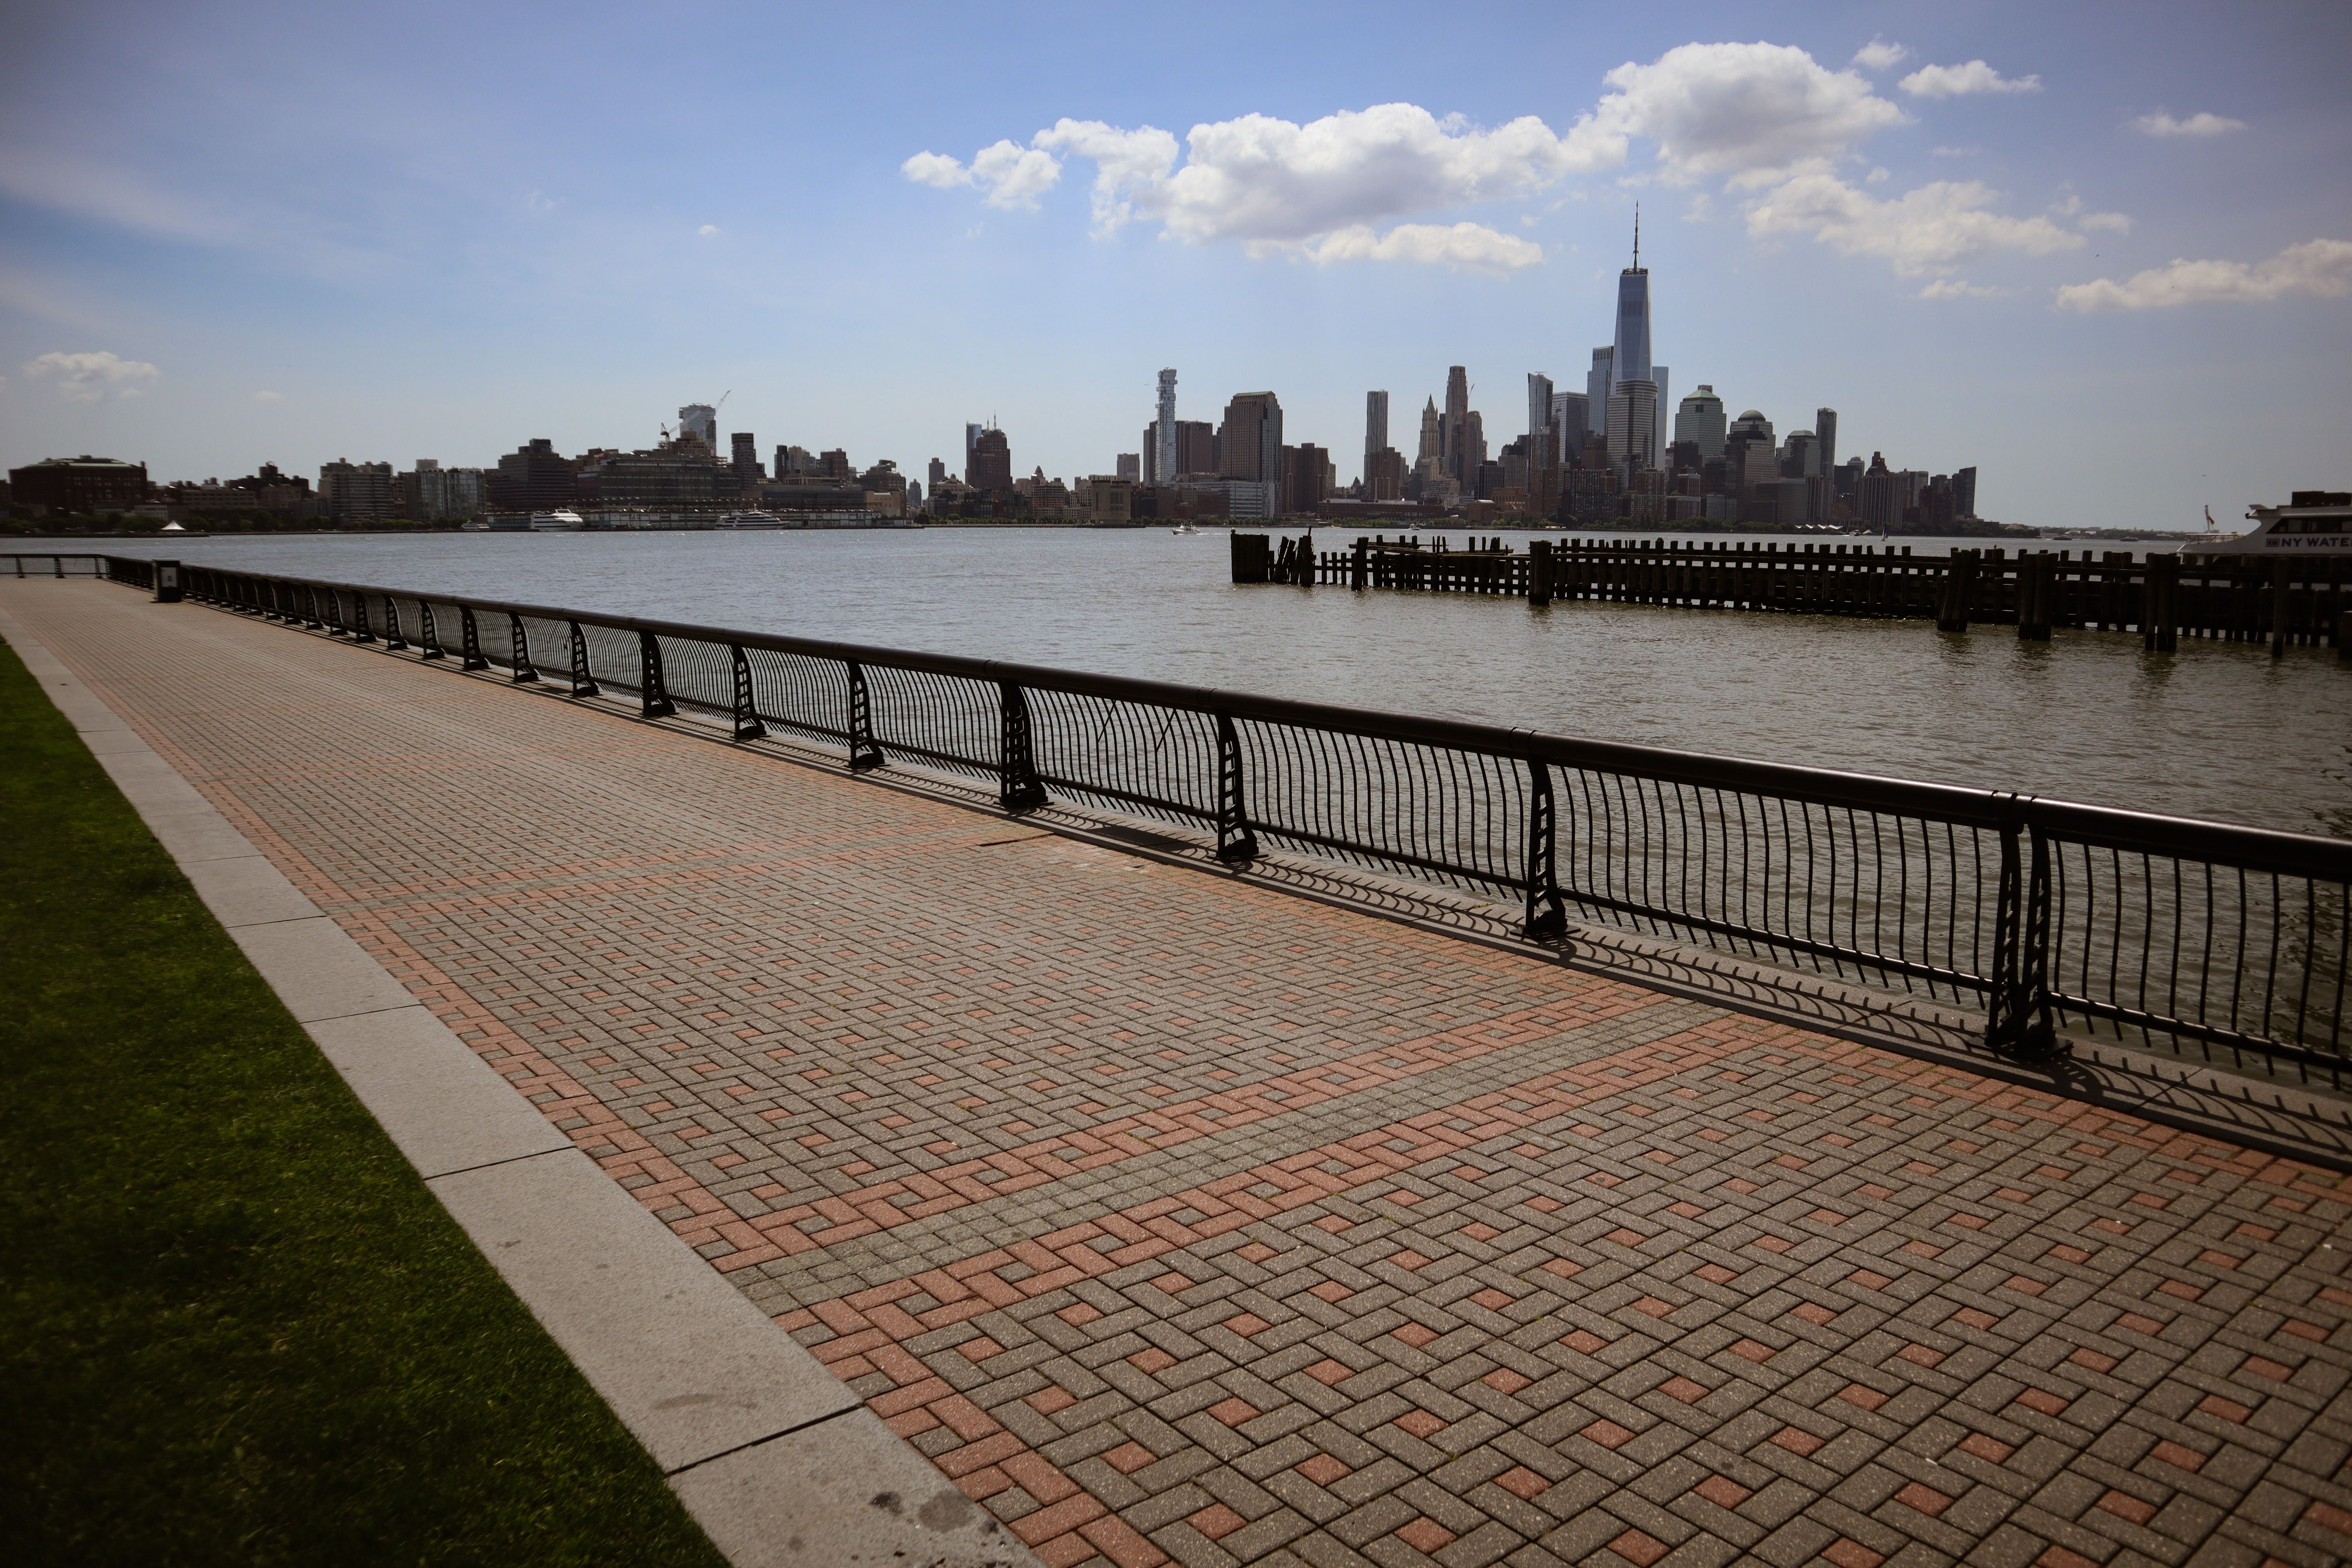 Wide path along the Hudson River in Hoboken, New Jersey